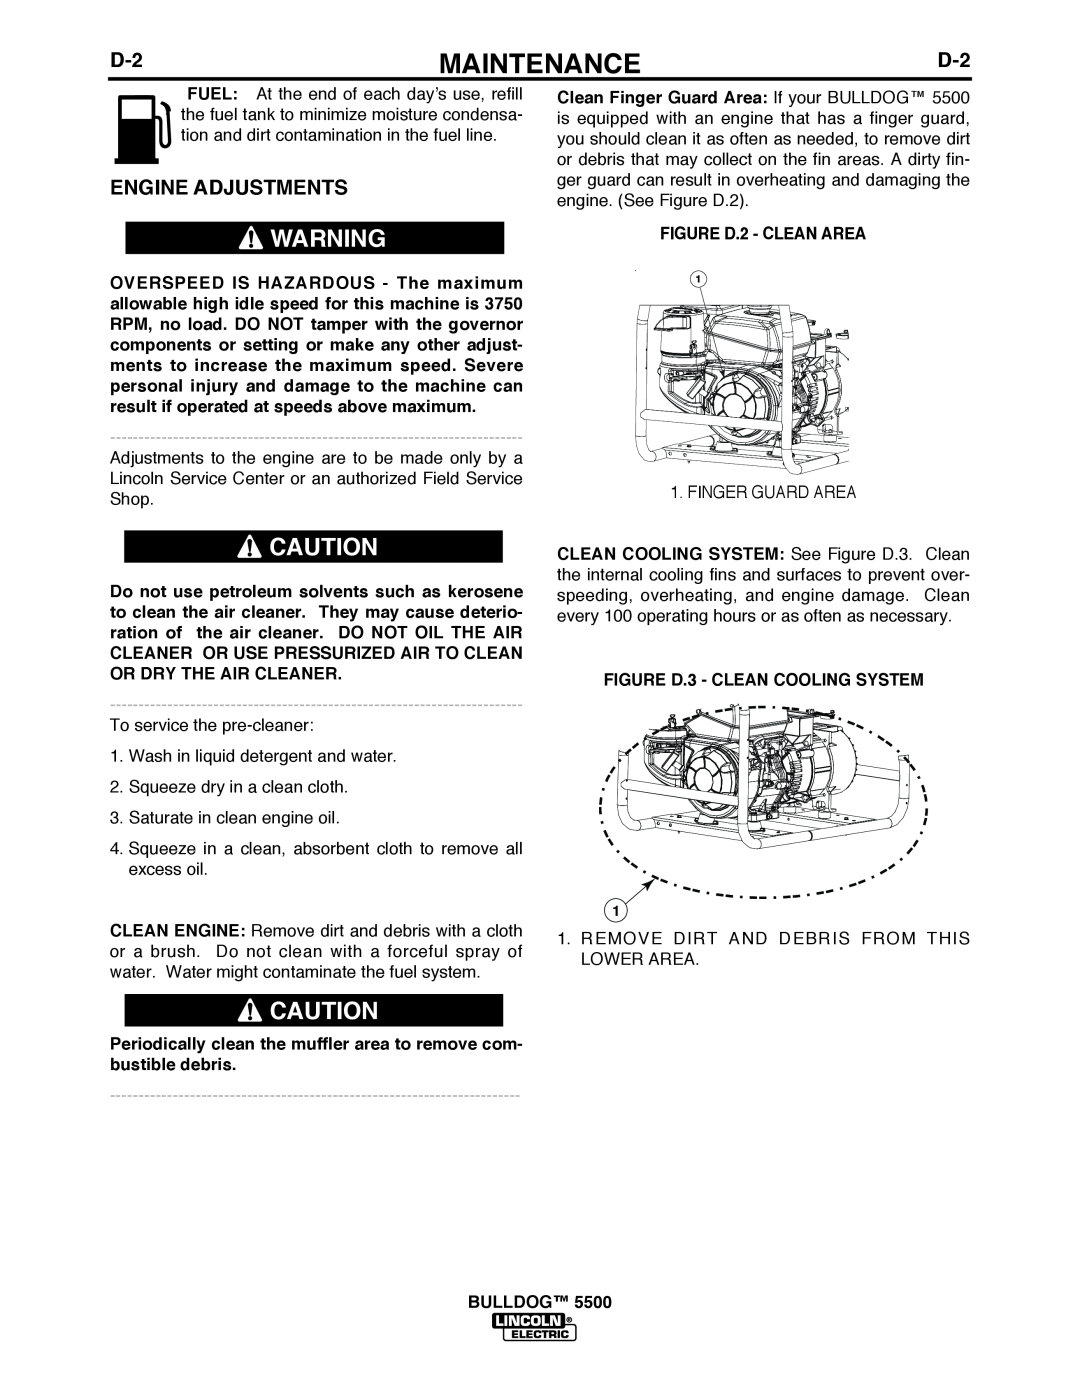 Lincoln Electric IM10074 manual Maintenance, Engine Adjustments, FIGURE D.2 - CLEAN AREA, FIGURE D.3 - CLEAN COOLING SYSTEM 